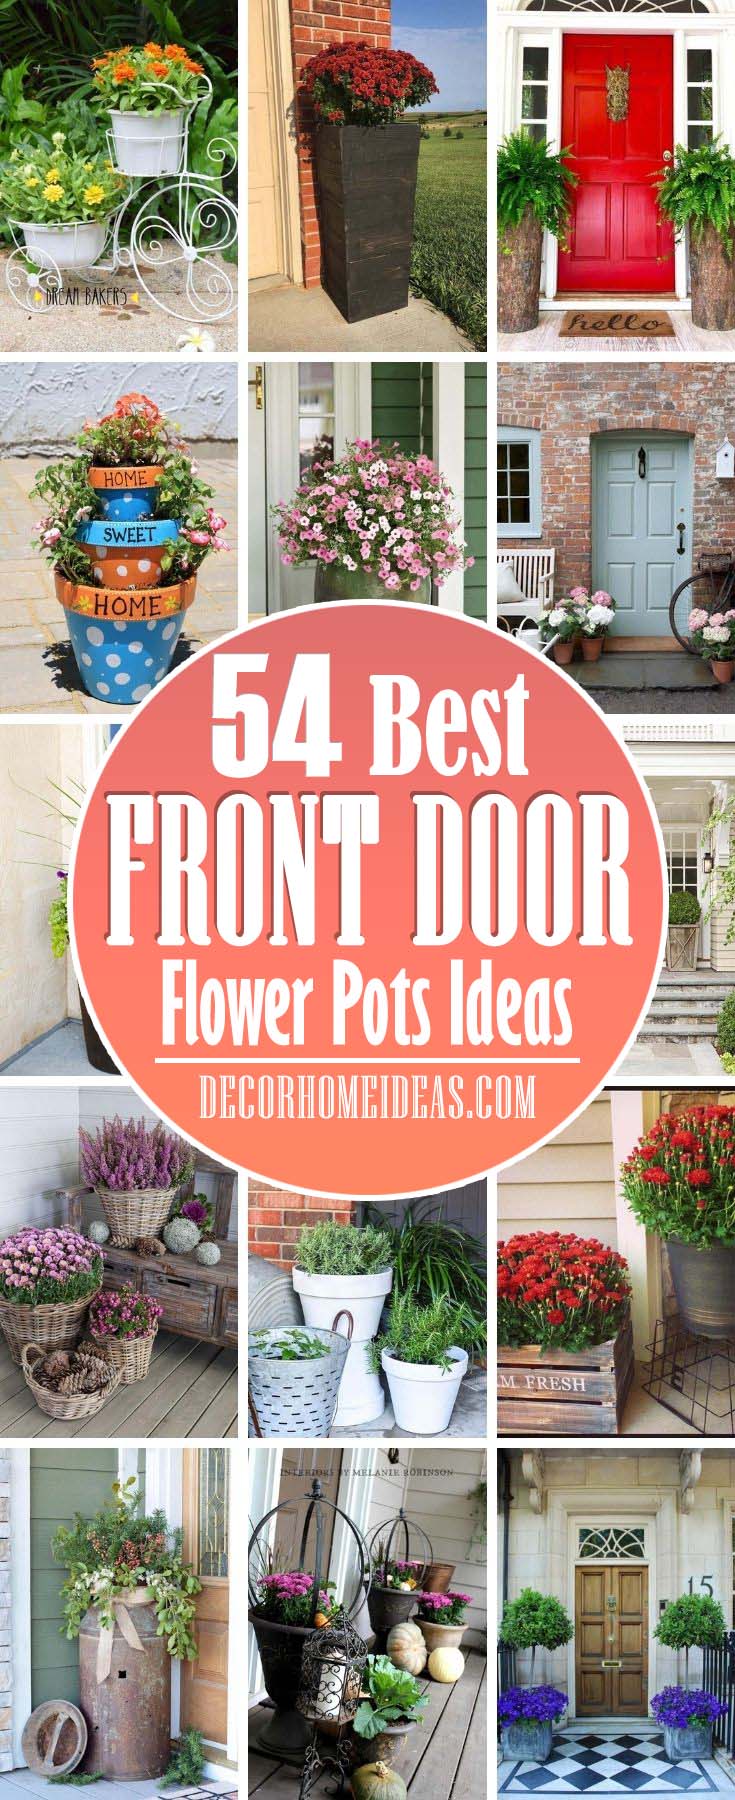 Best Front Door Flower Pots Ideas. Something very simple and also very beautiful you can do for your front door entrance is to have flower pots. Display them on either side of the door or in its vicinity. #decorhomeideas